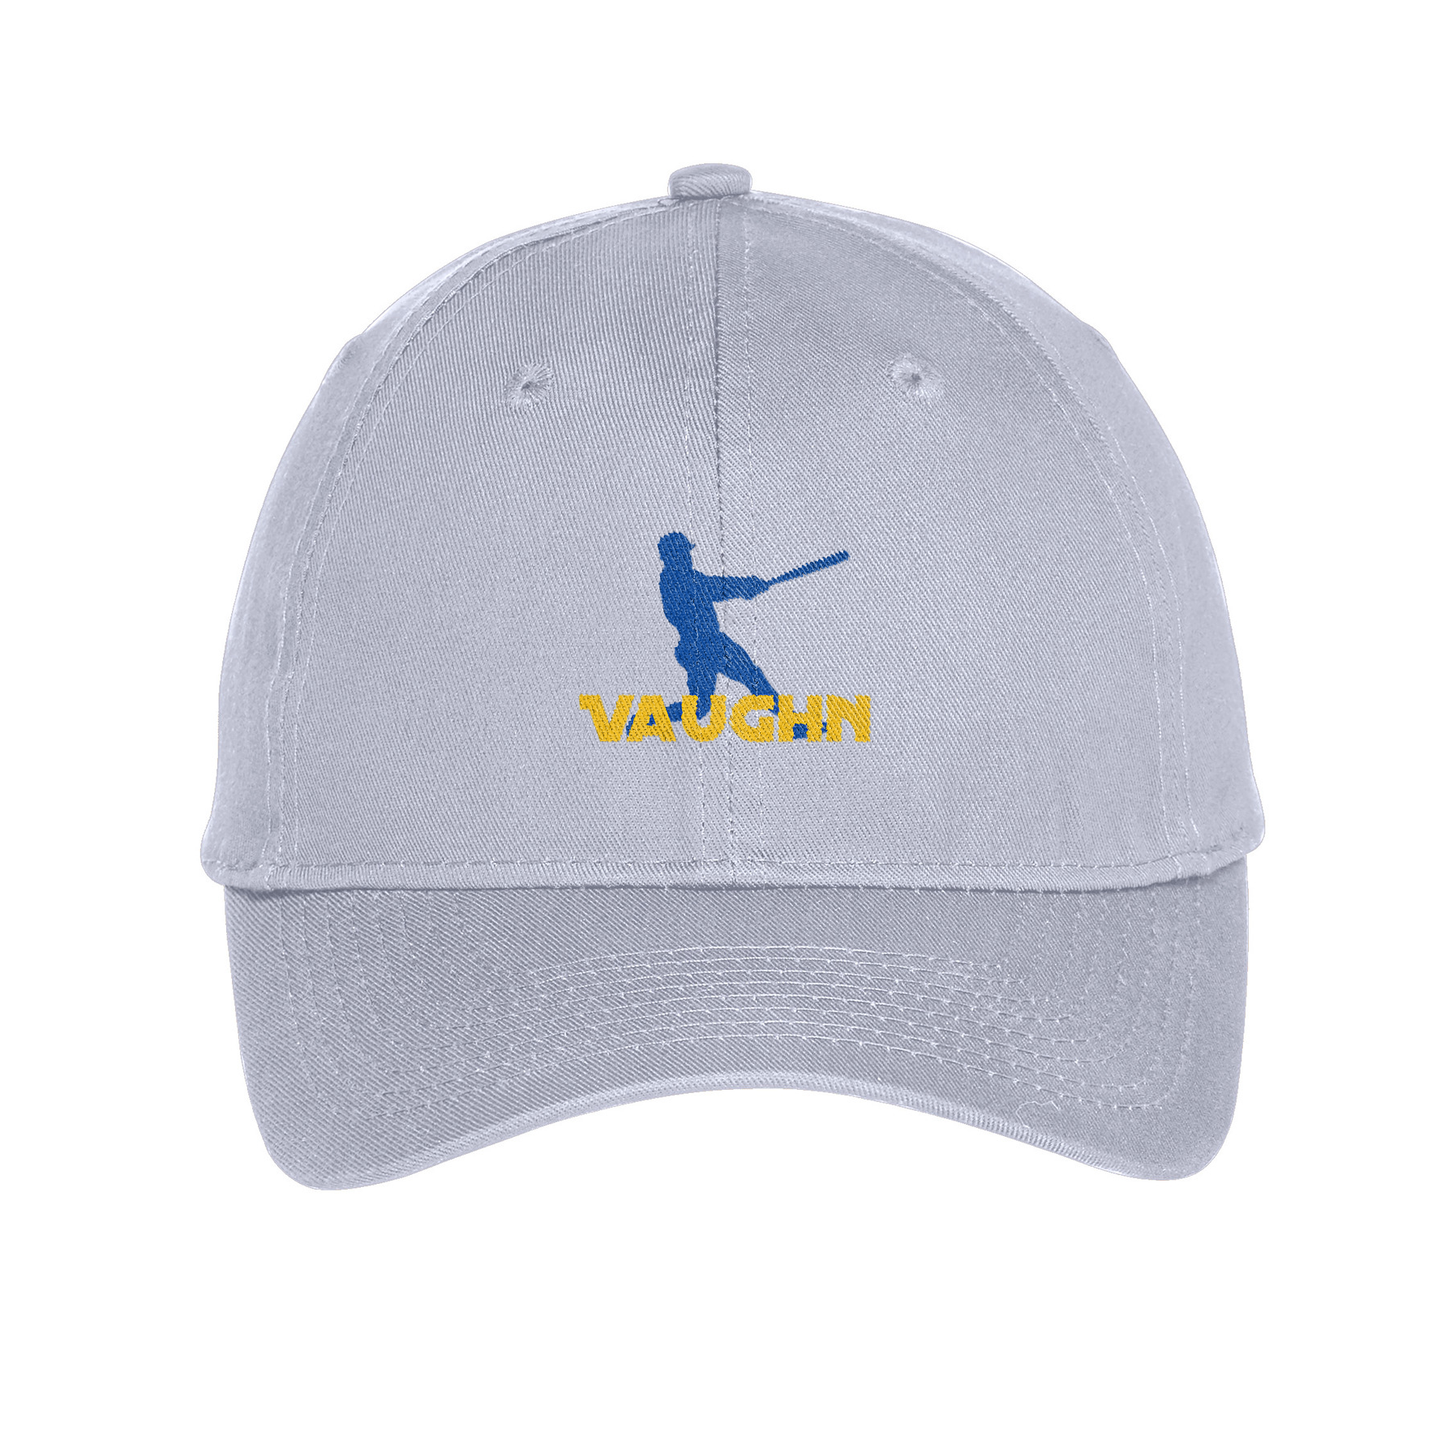 GT Vaughn Embroidered Twill Cap